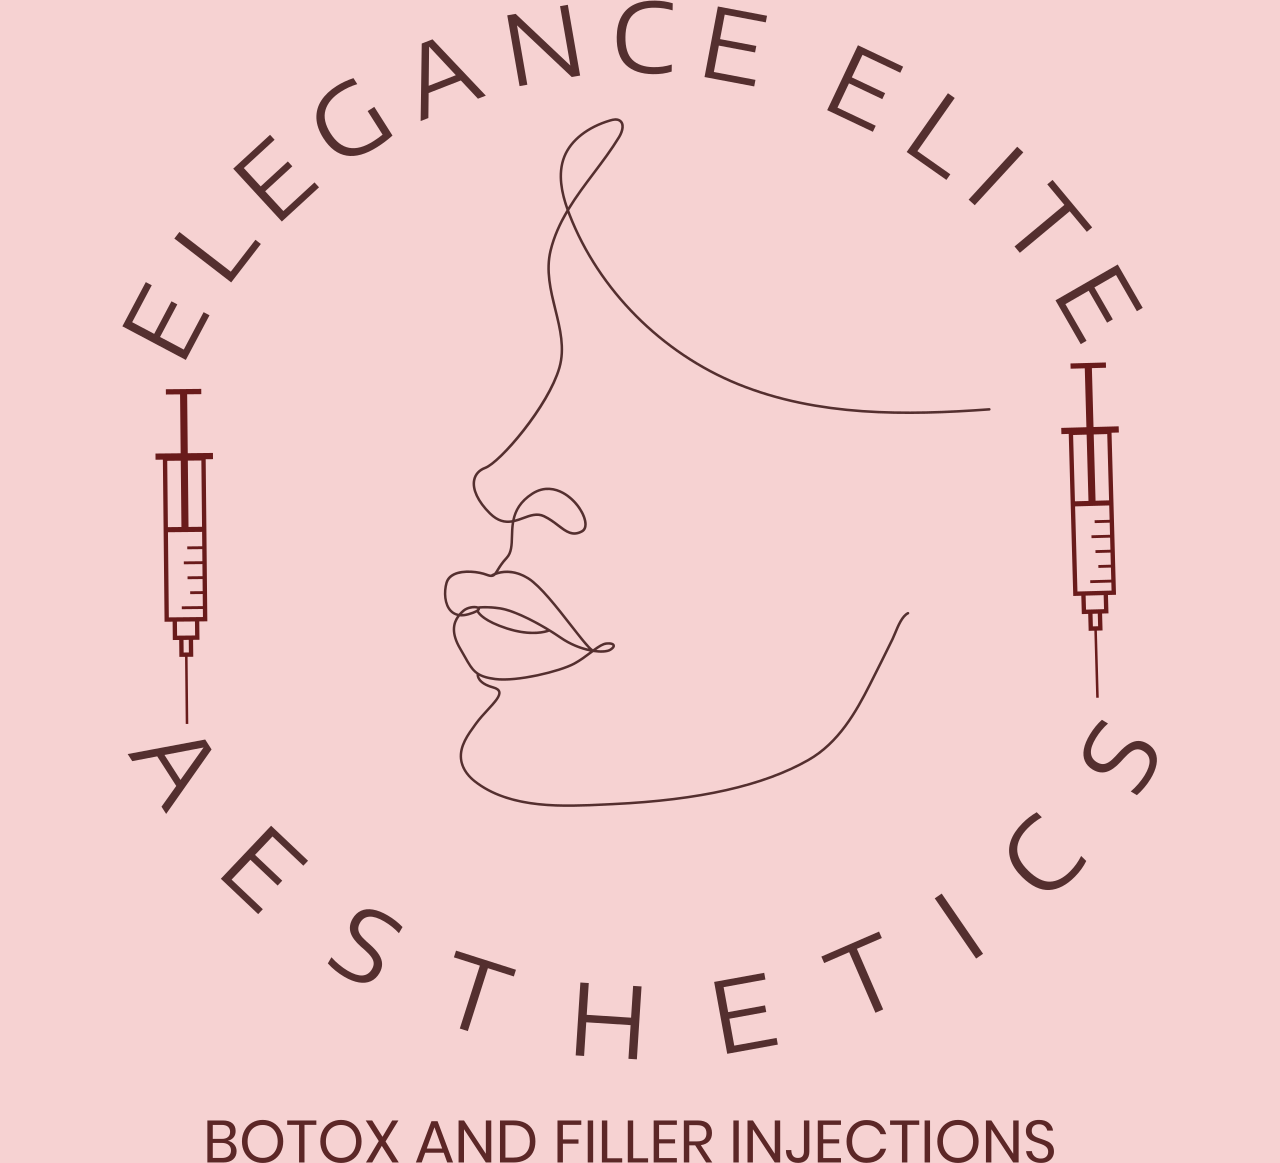 BOTOX AND FILLER INJECTIONS's logo